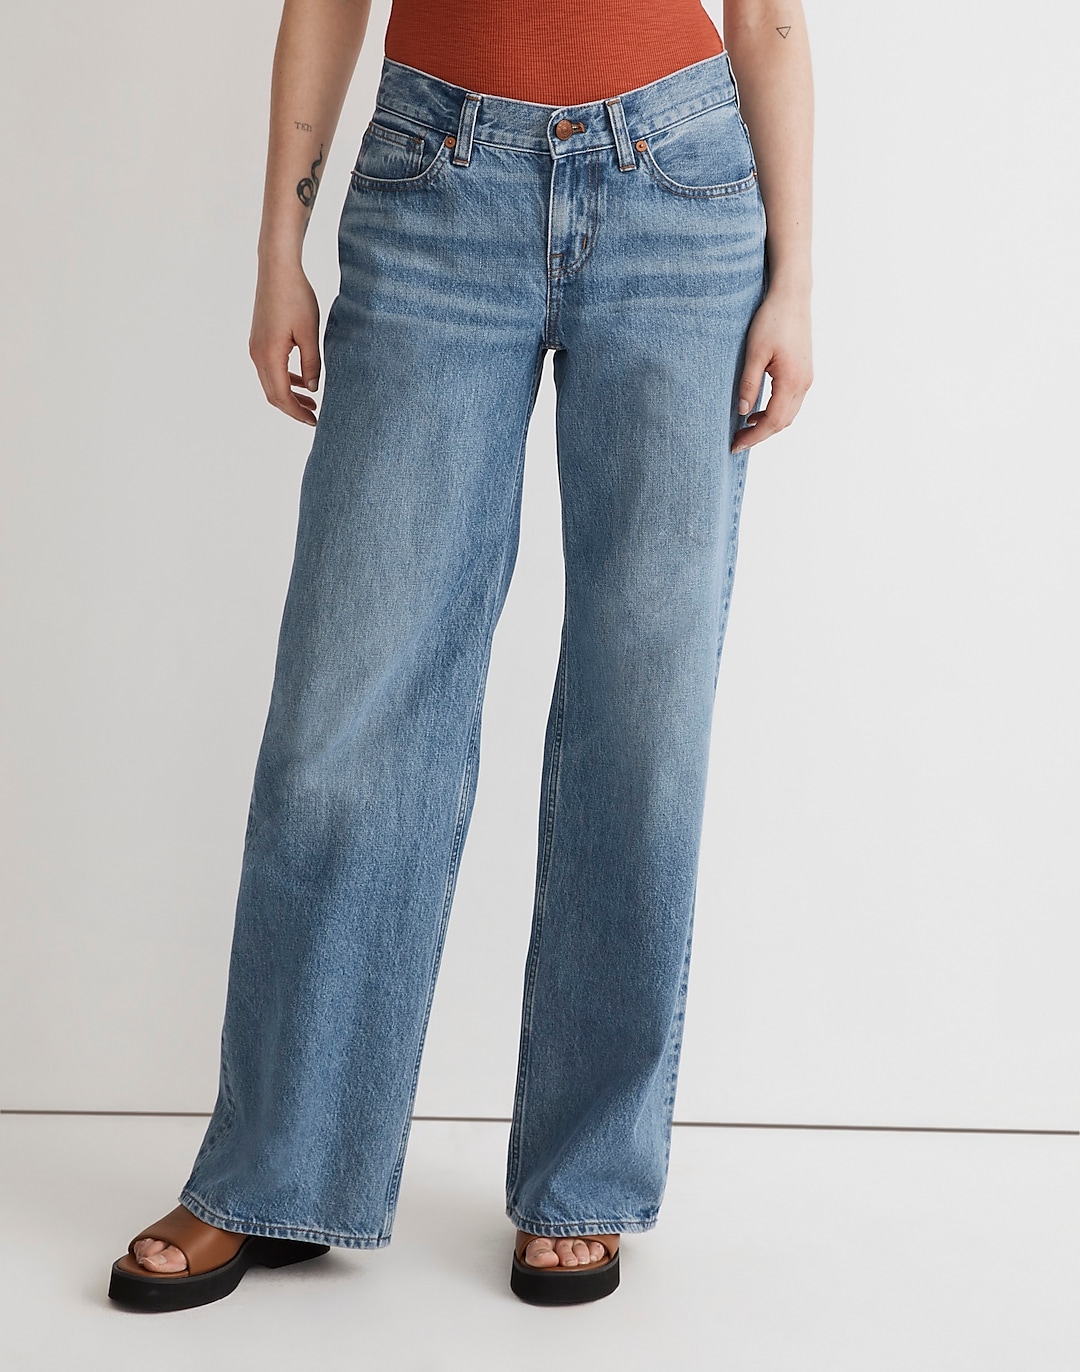 Low-Rise Superwide-Leg Jeans in Mainview Wash | Madewell